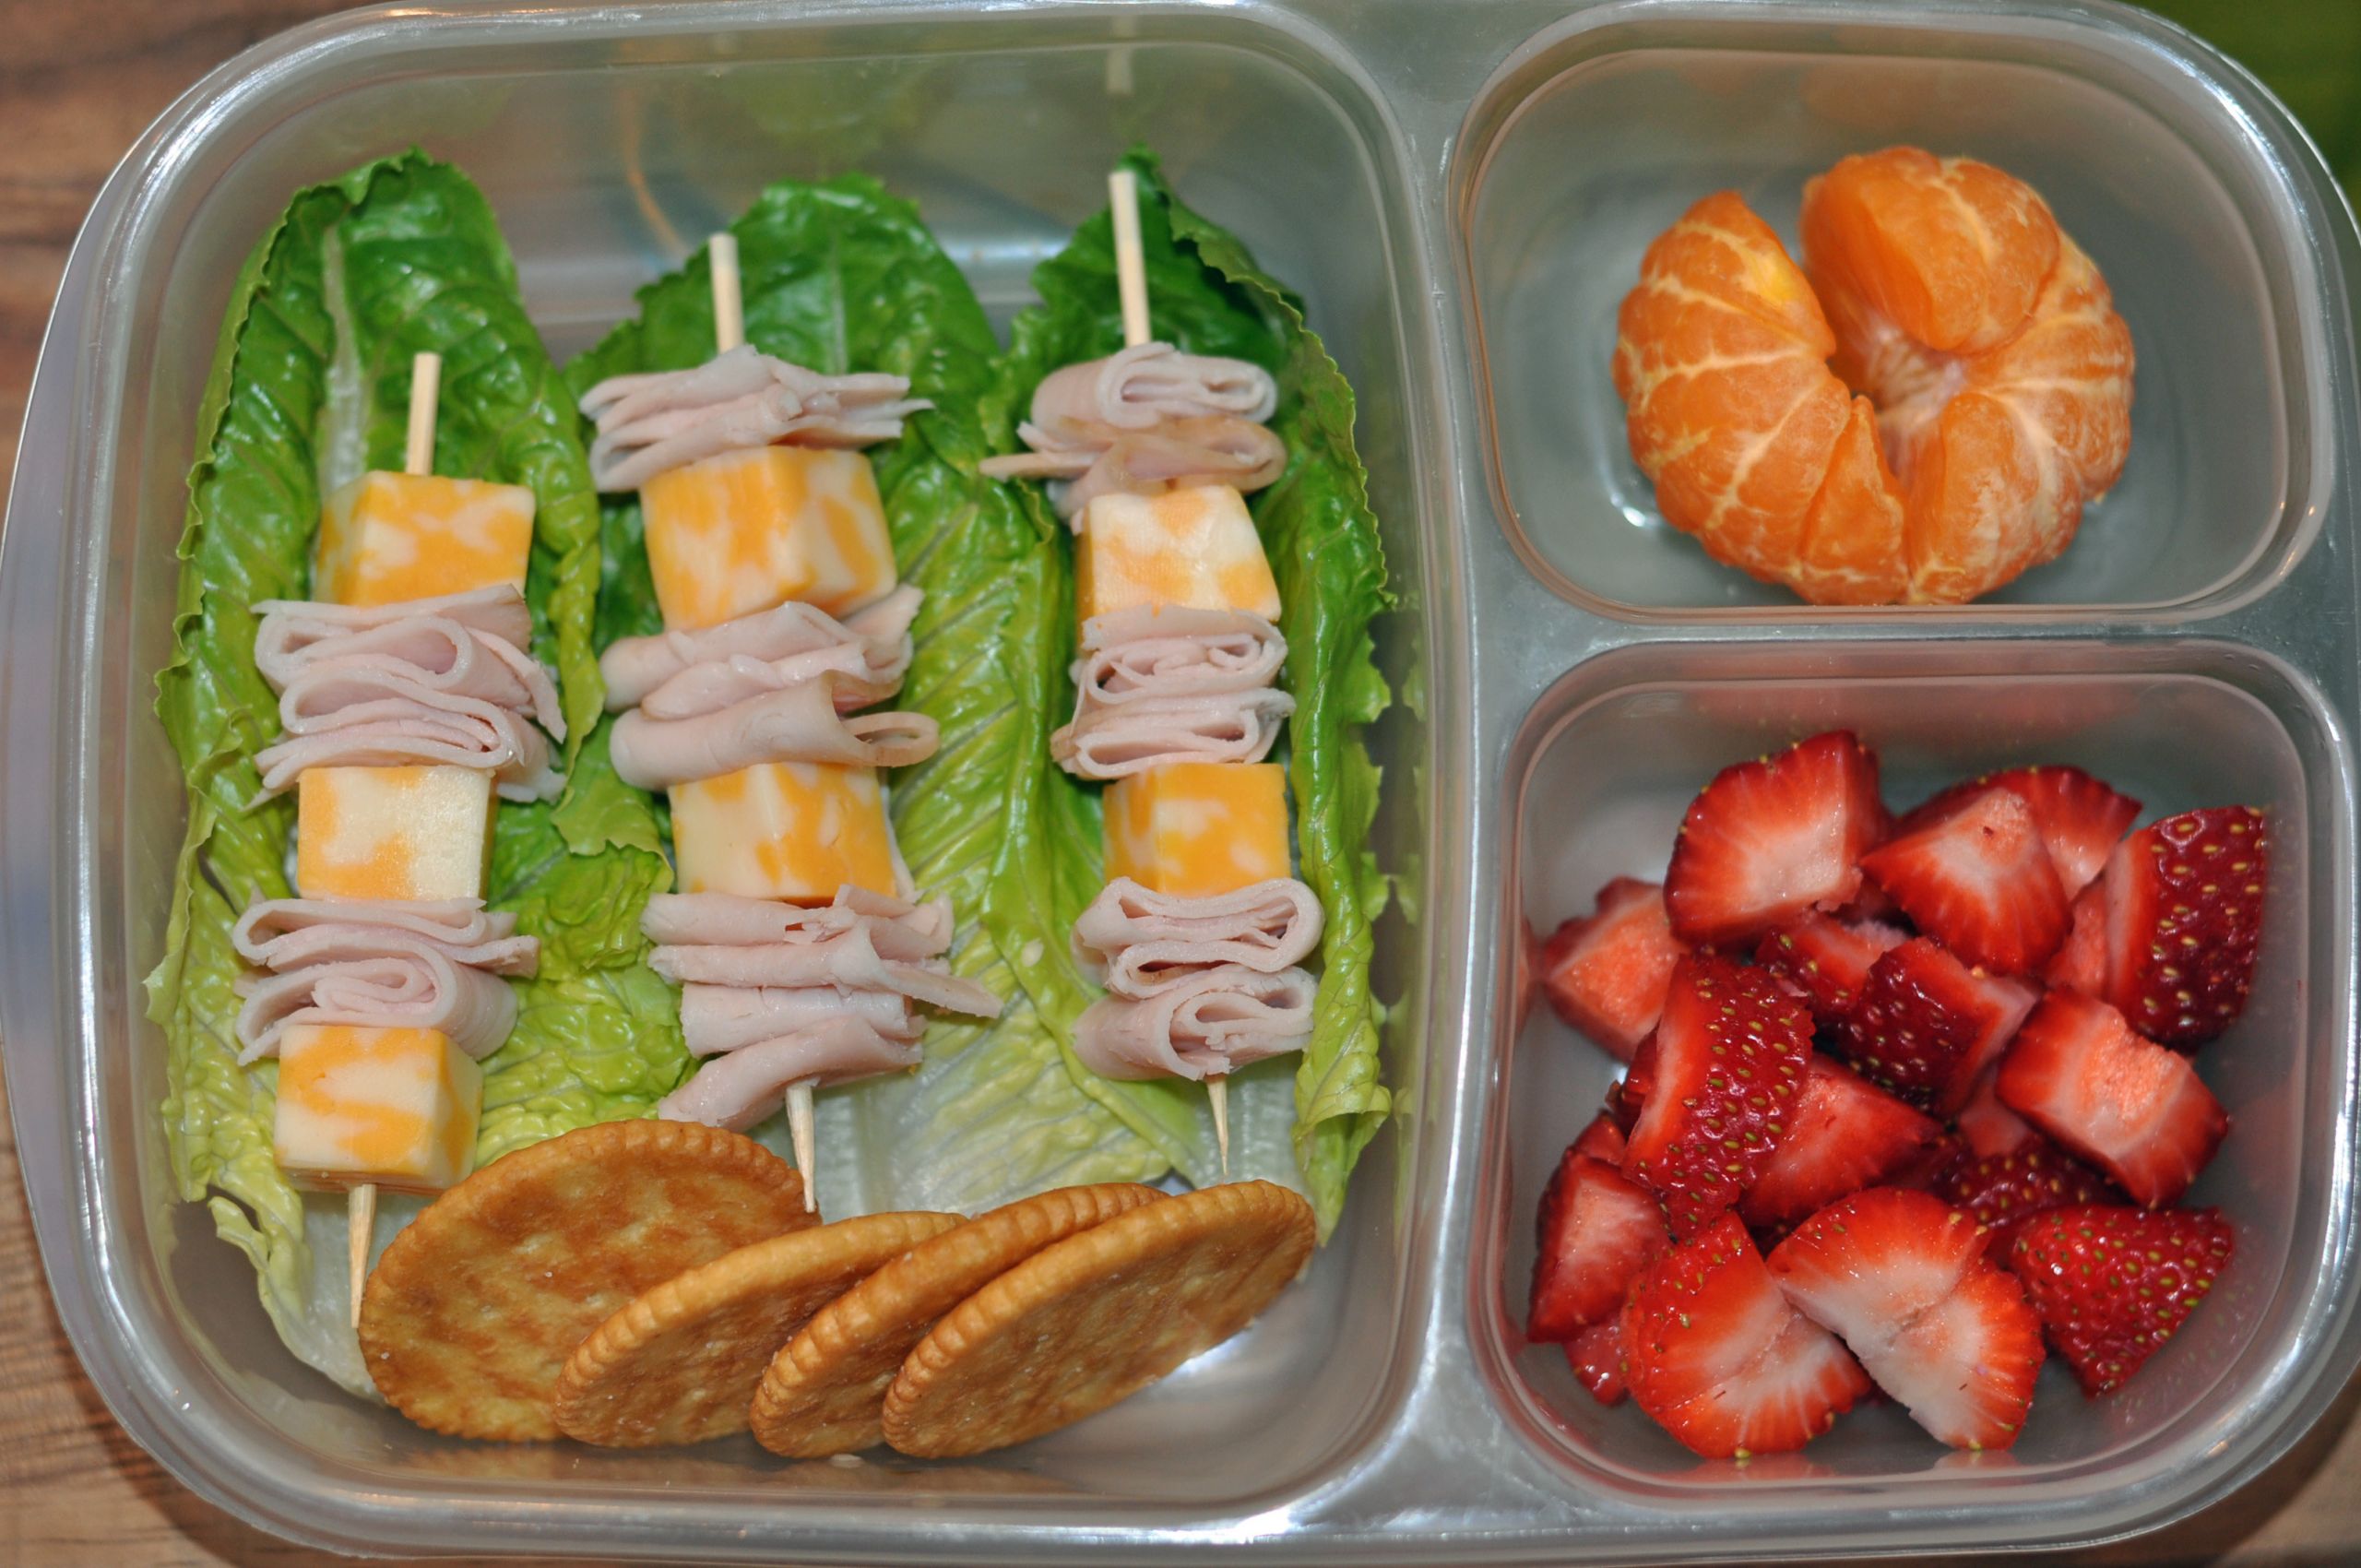 Easy Healthy School Lunches
 Easy School Lunches With Hillshire Farm Natural Lunchmeat